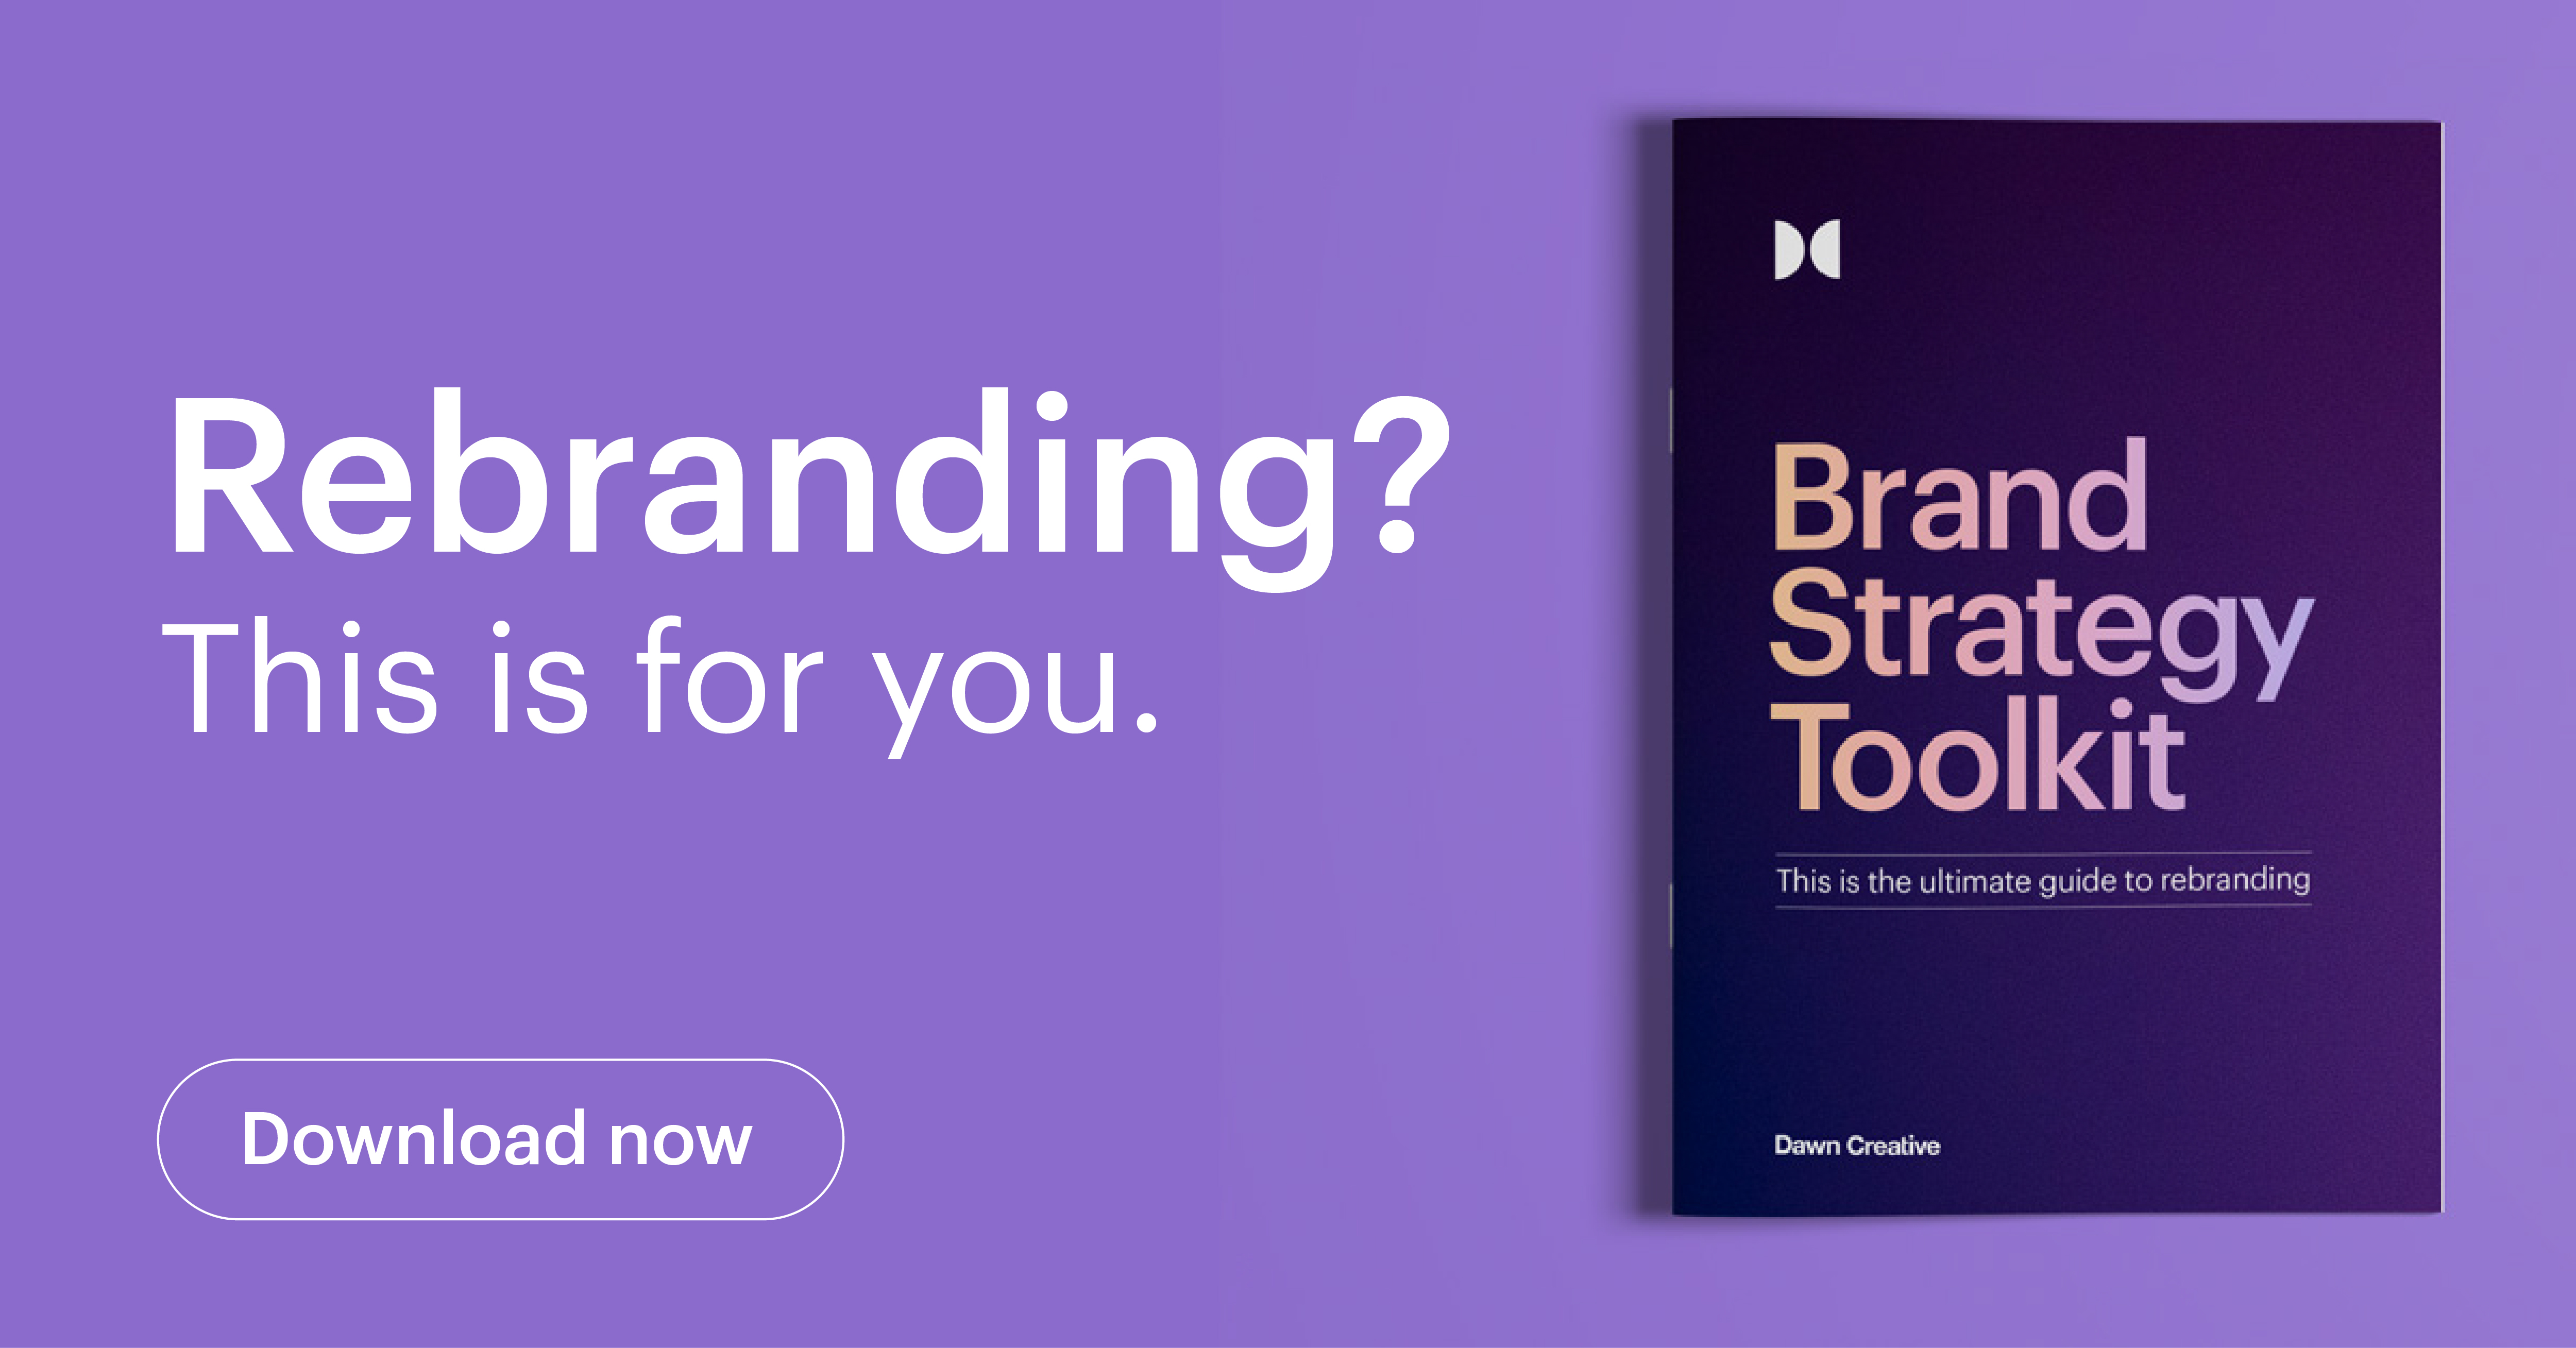 Rebranding? This is for you. Download now. Brand Strategy Toolkit.